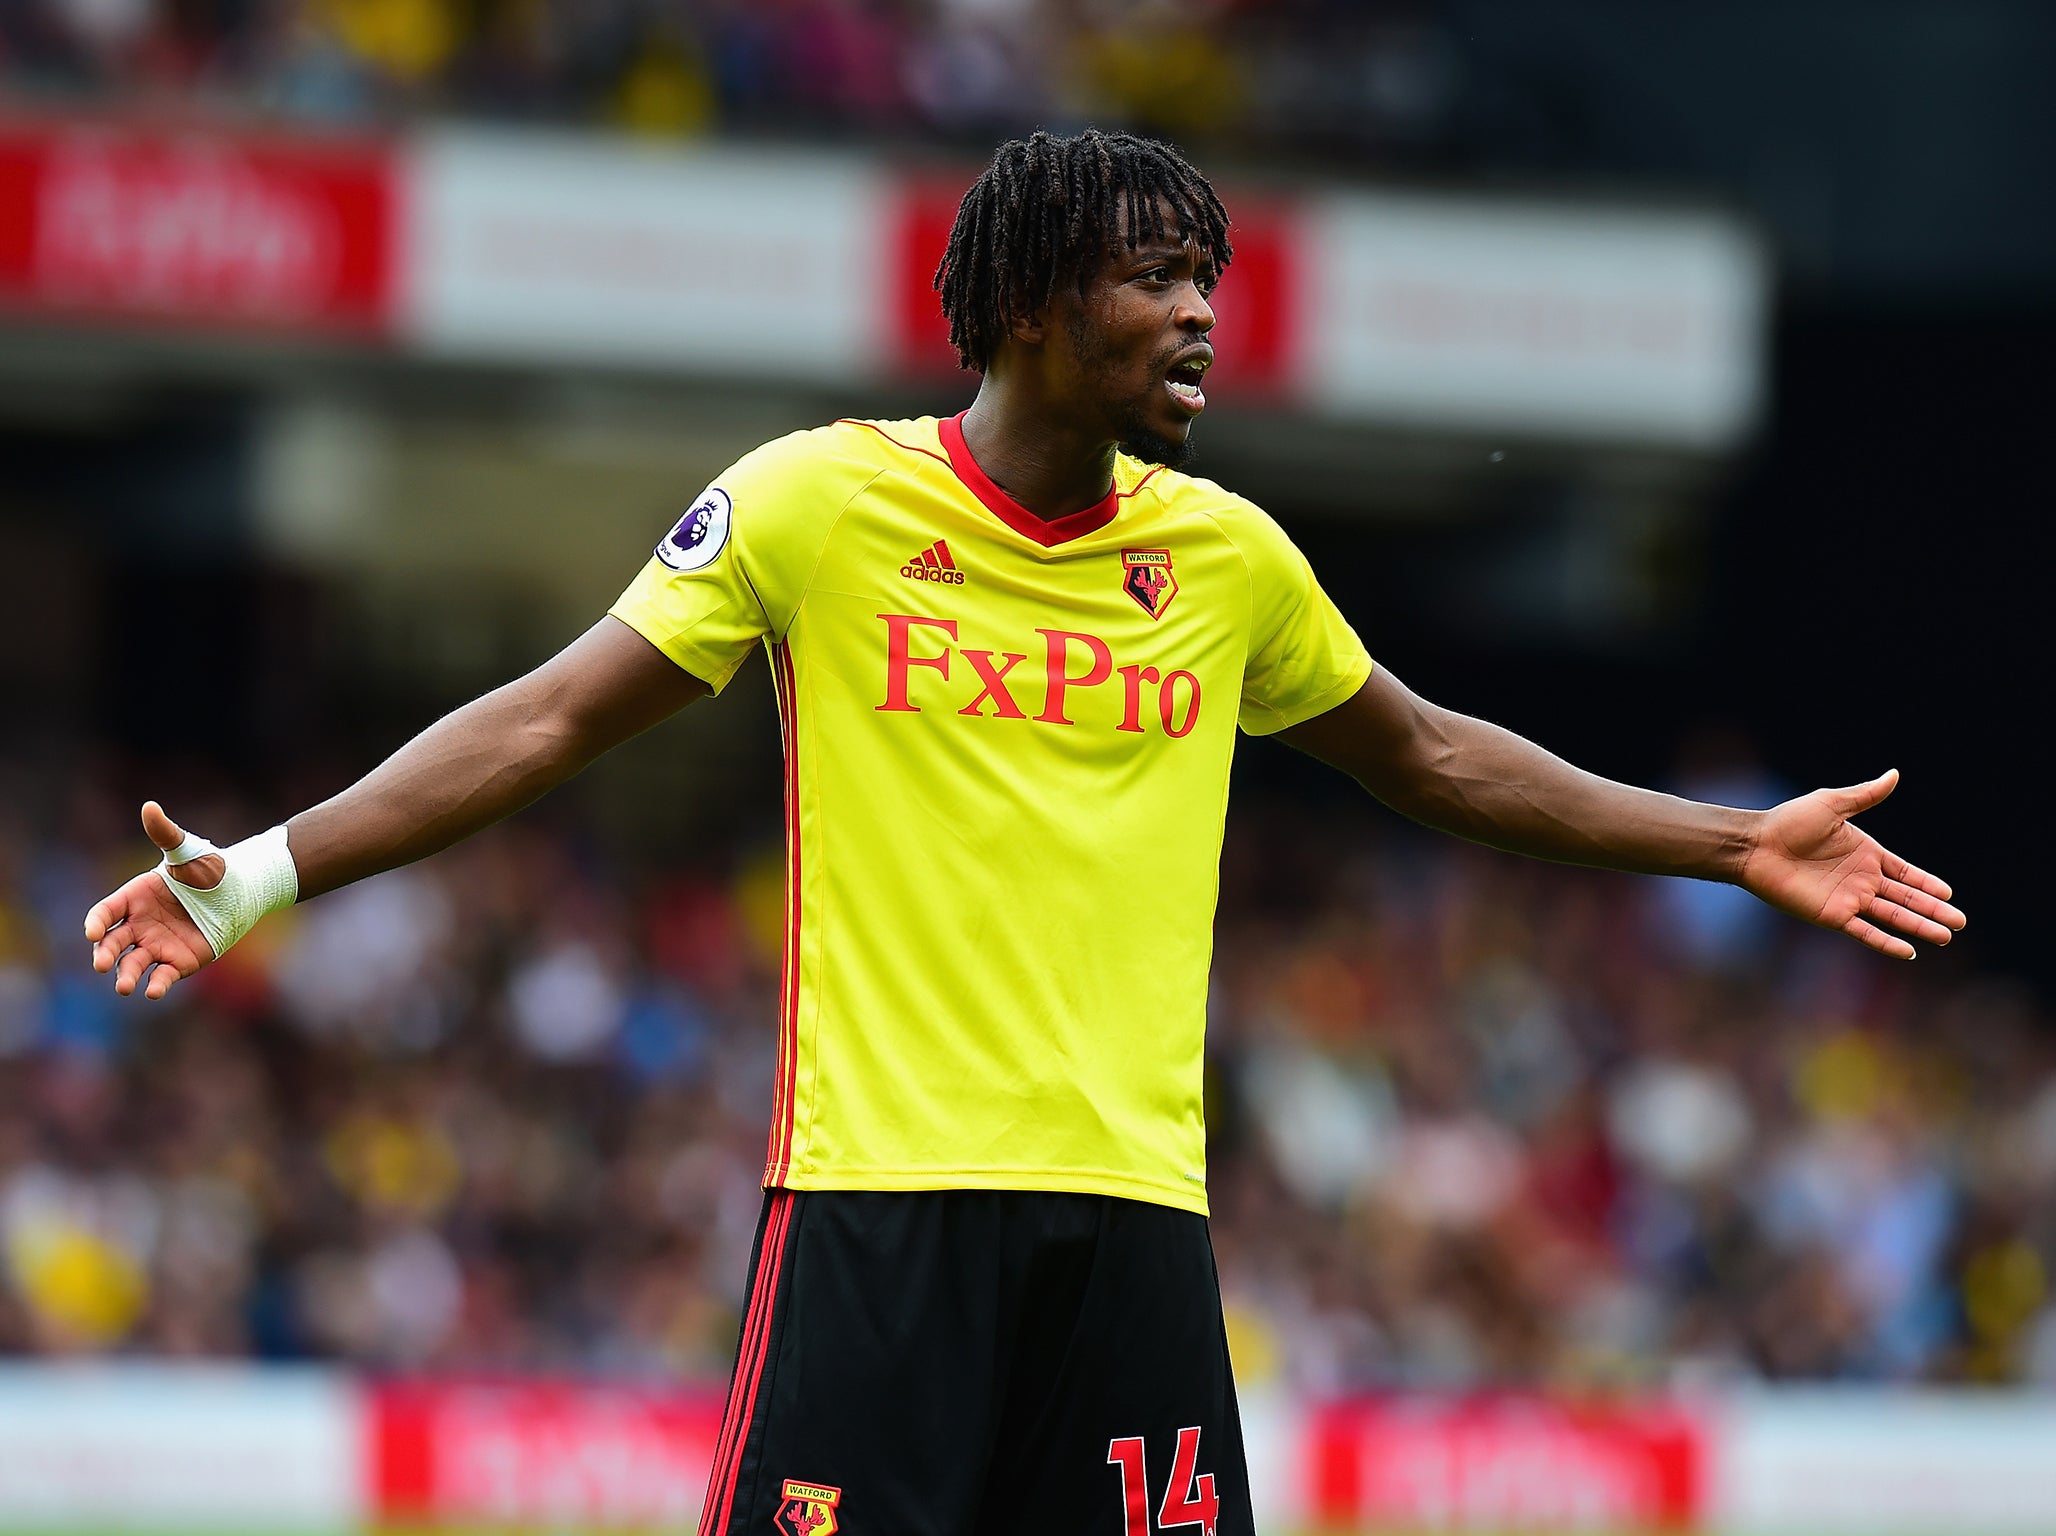 Chalobah has been one of the stars of Watford’s season since moving from Chelsea